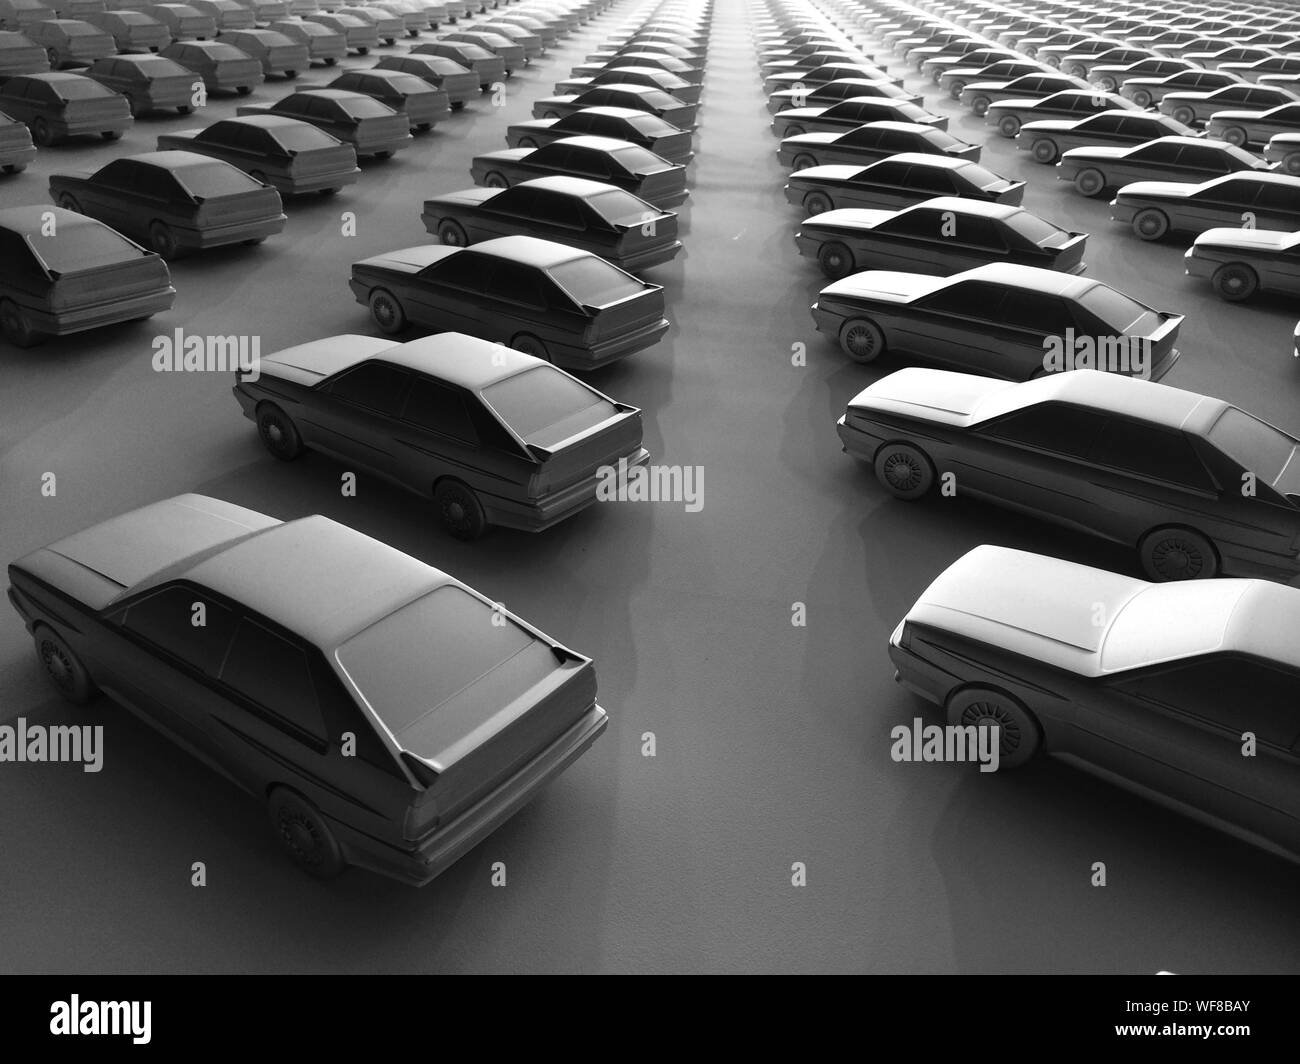 High Angle View Of Cars In Stationary Stock Photo